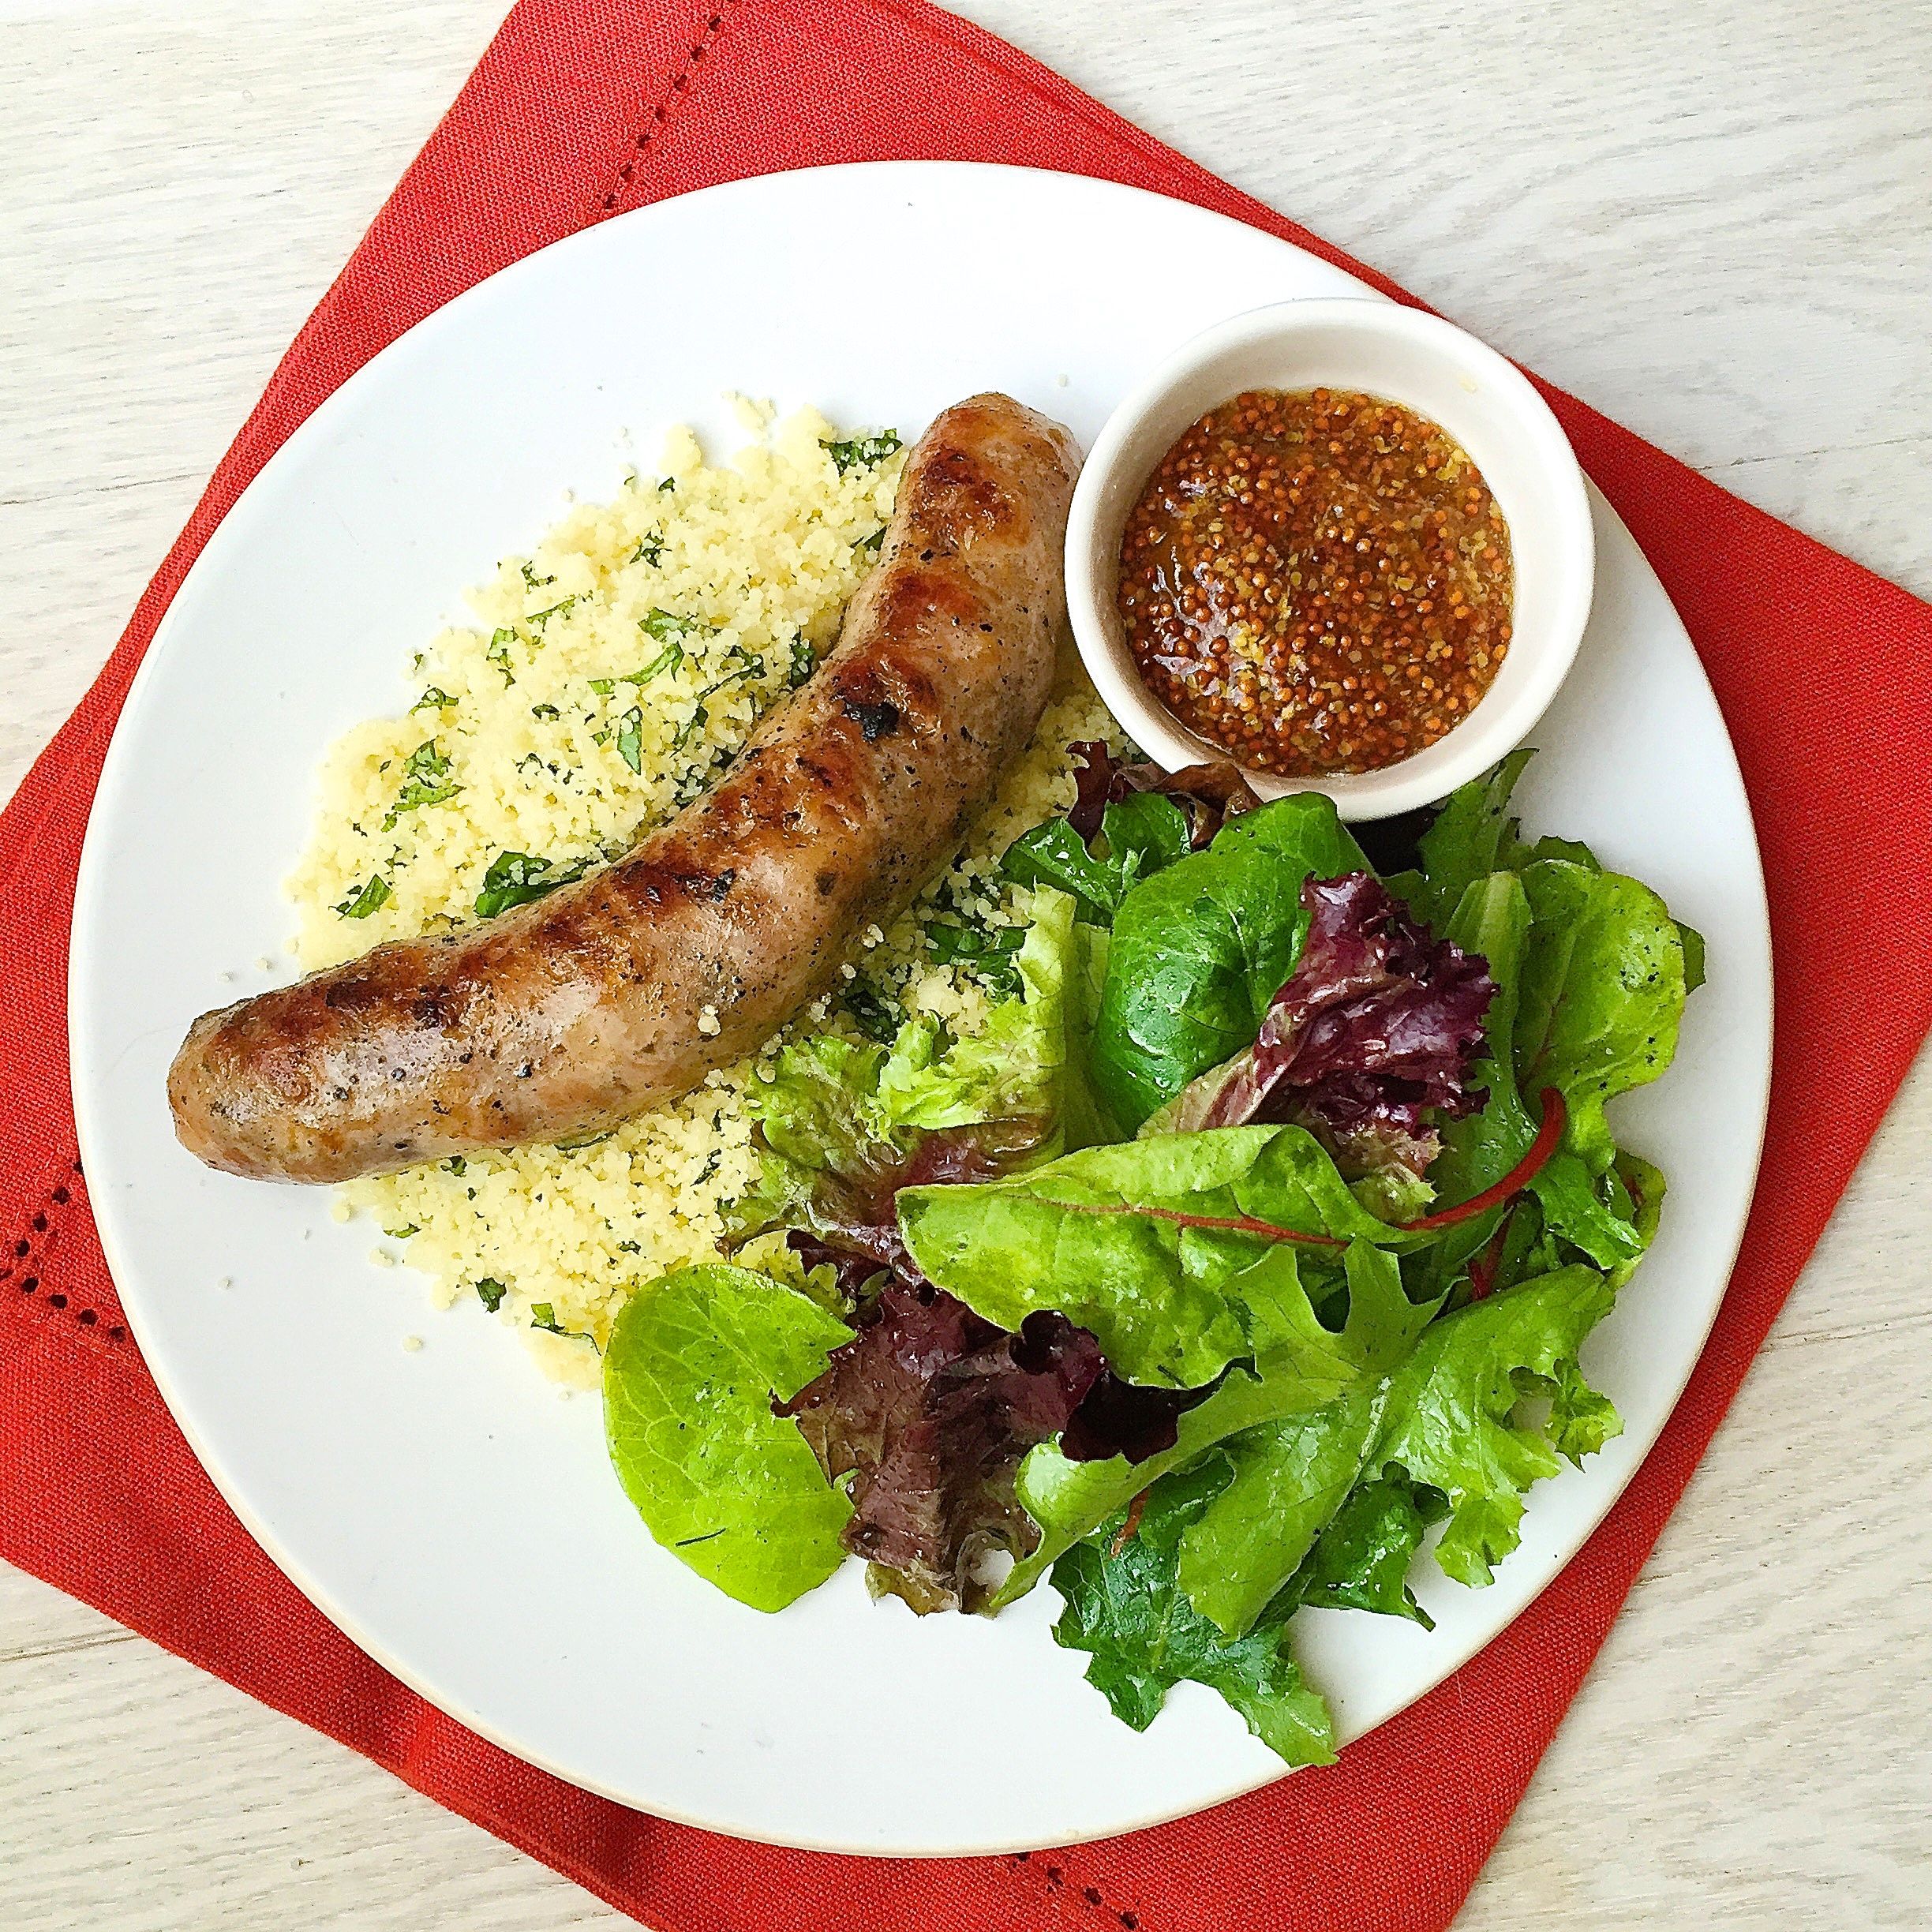 Grilled Sausages with Homemade Mustard